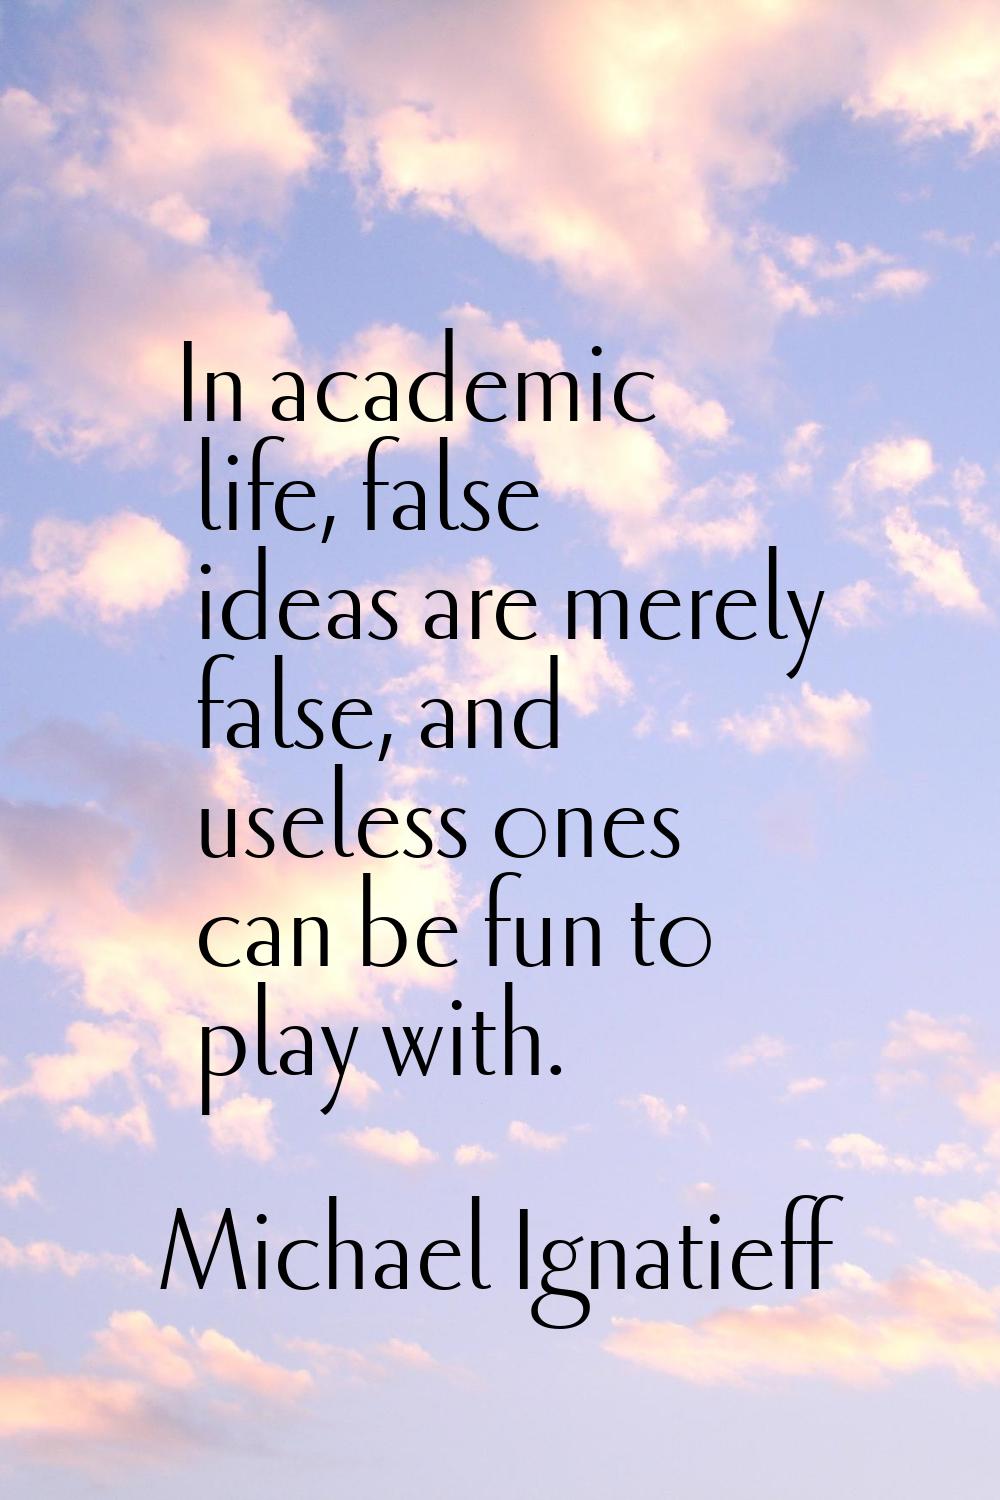 In academic life, false ideas are merely false, and useless ones can be fun to play with.